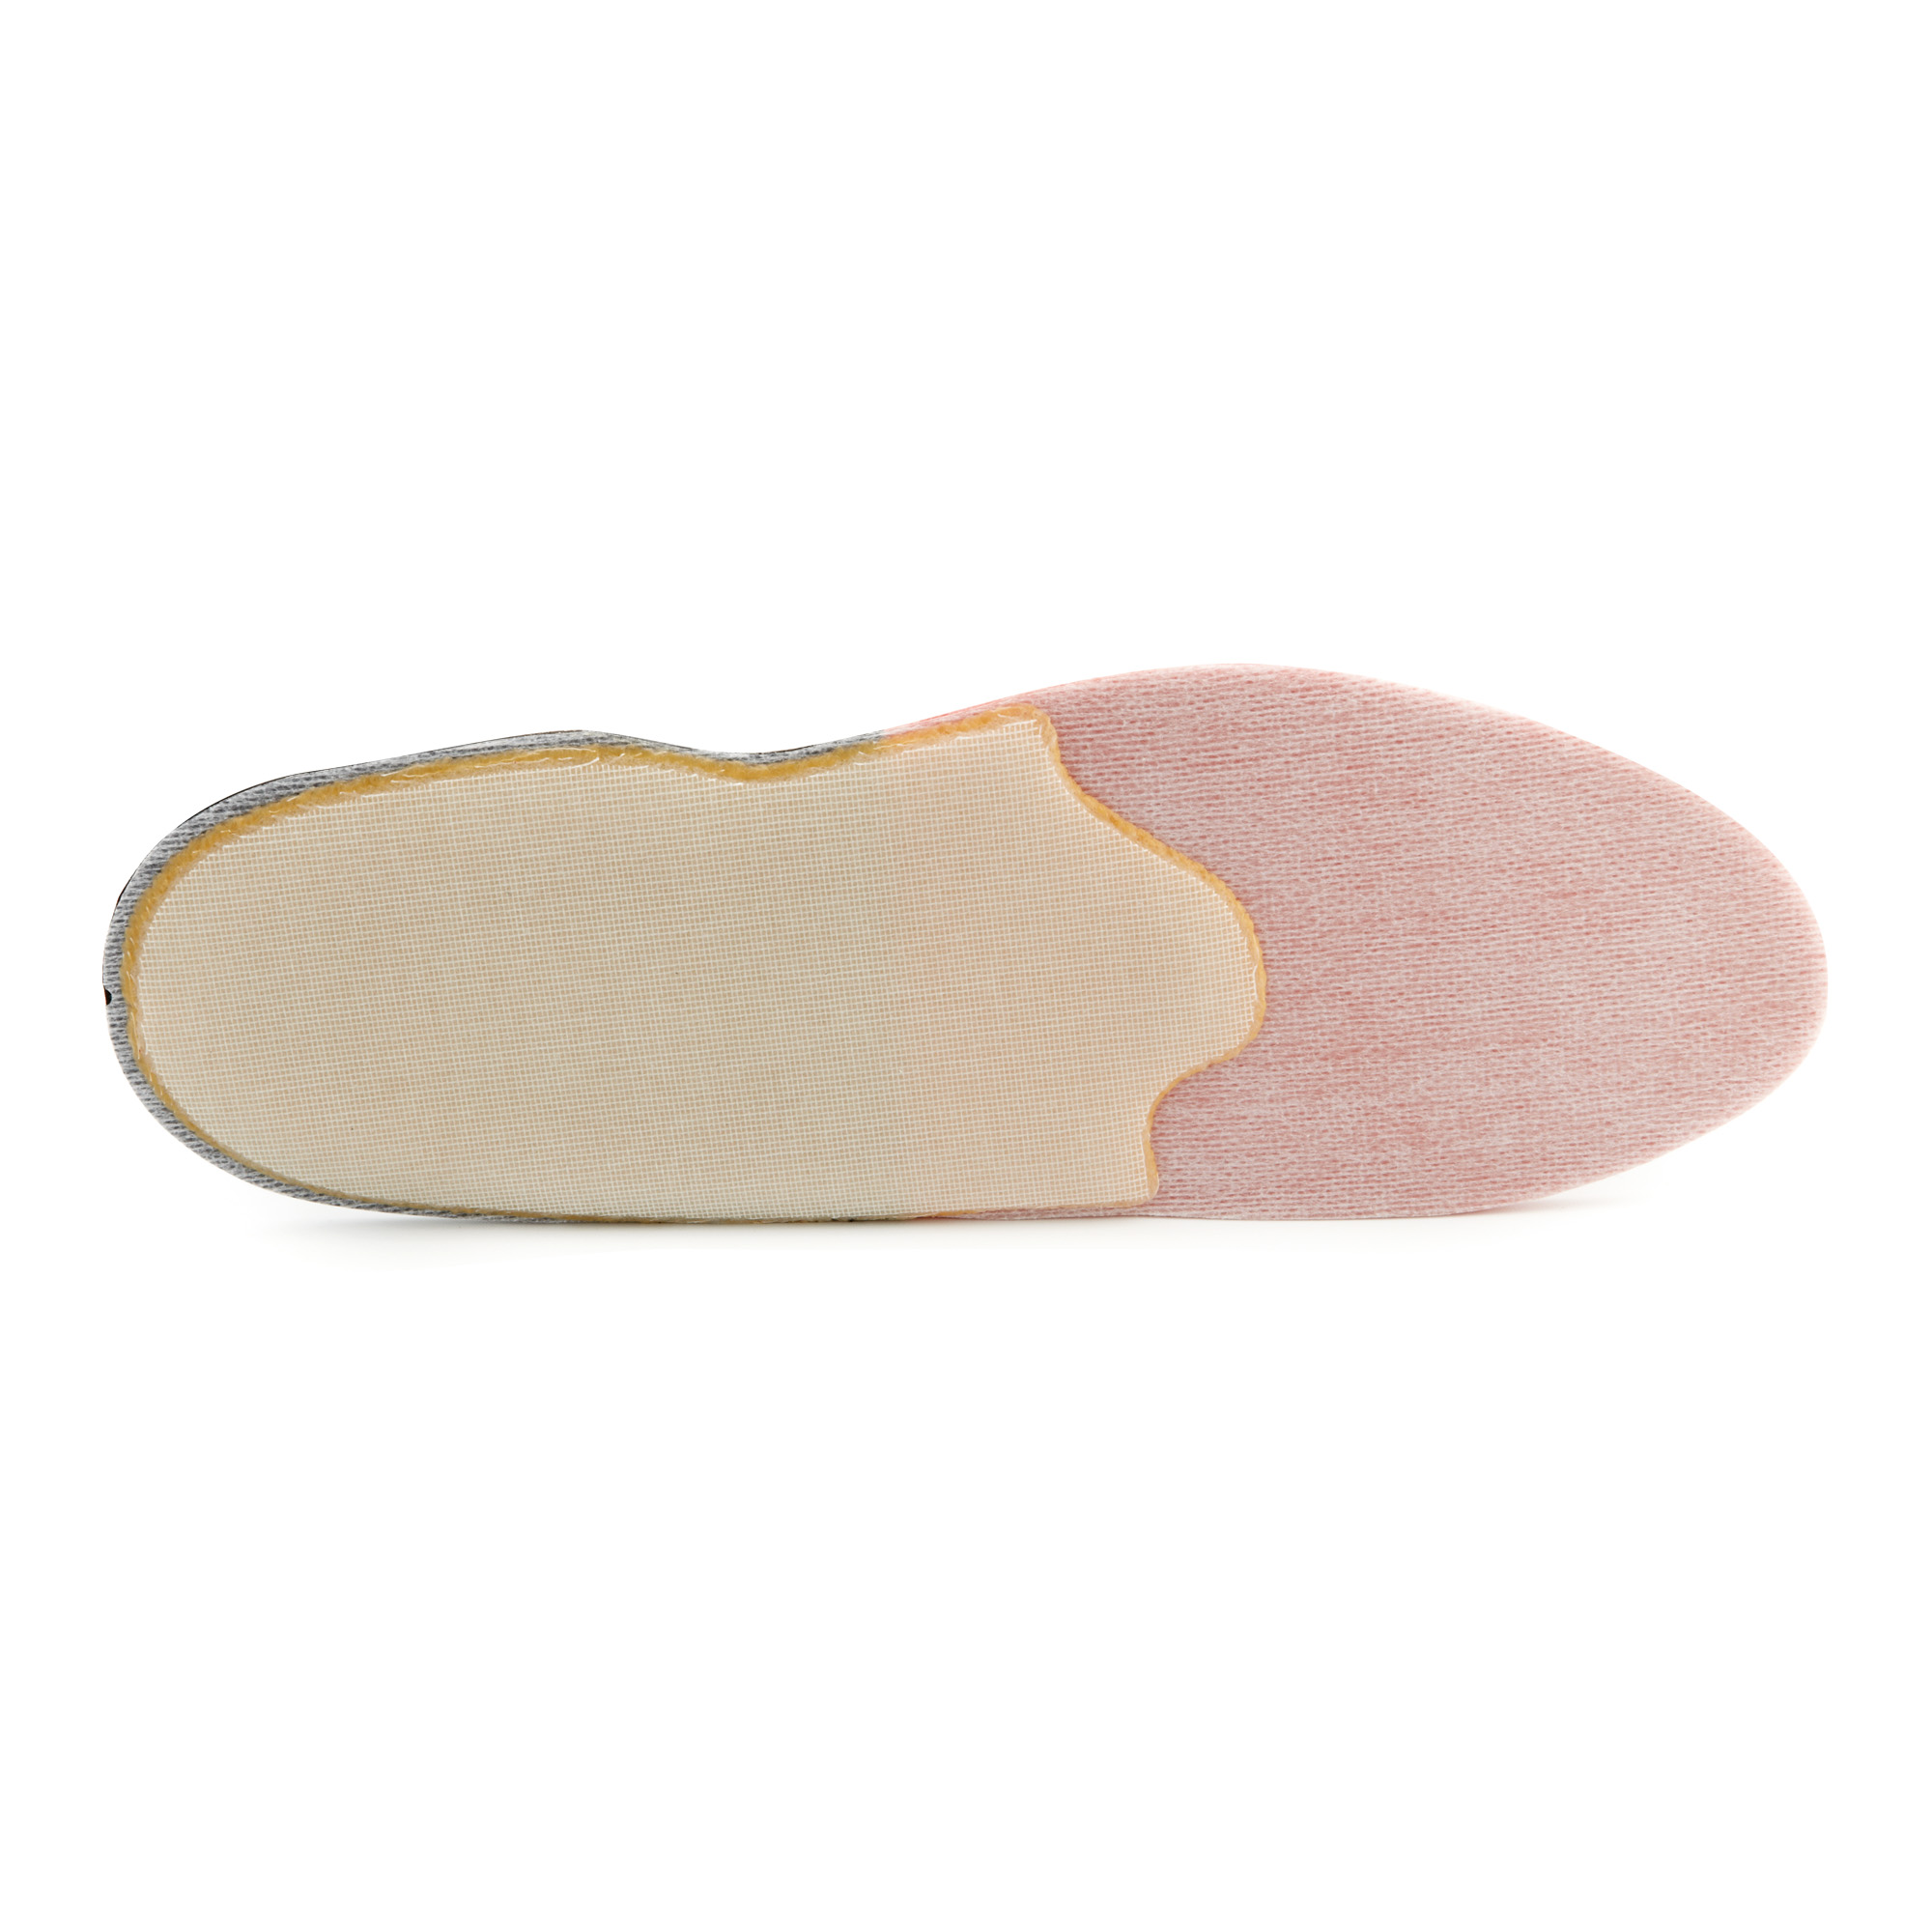 Semi-finished metatarsal insoles in resin to be thermoformed